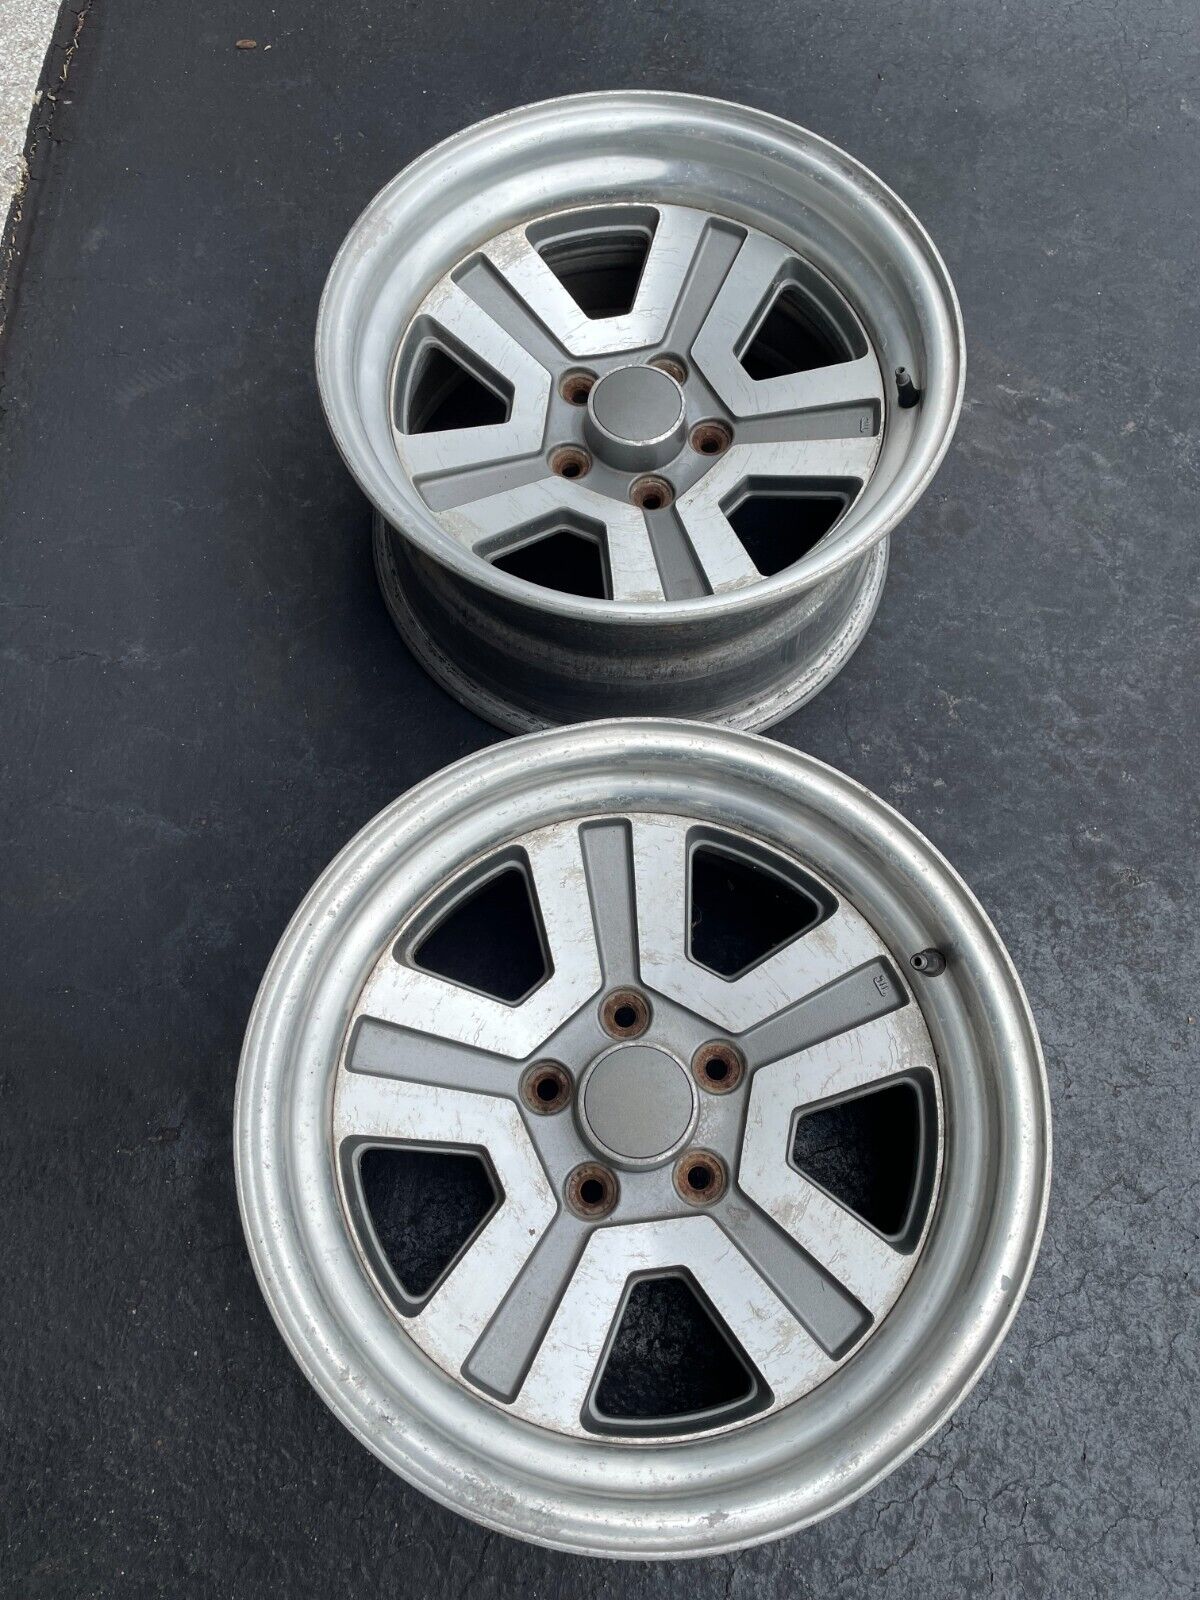 Starion Conquest rear rims 16x8 set of 2